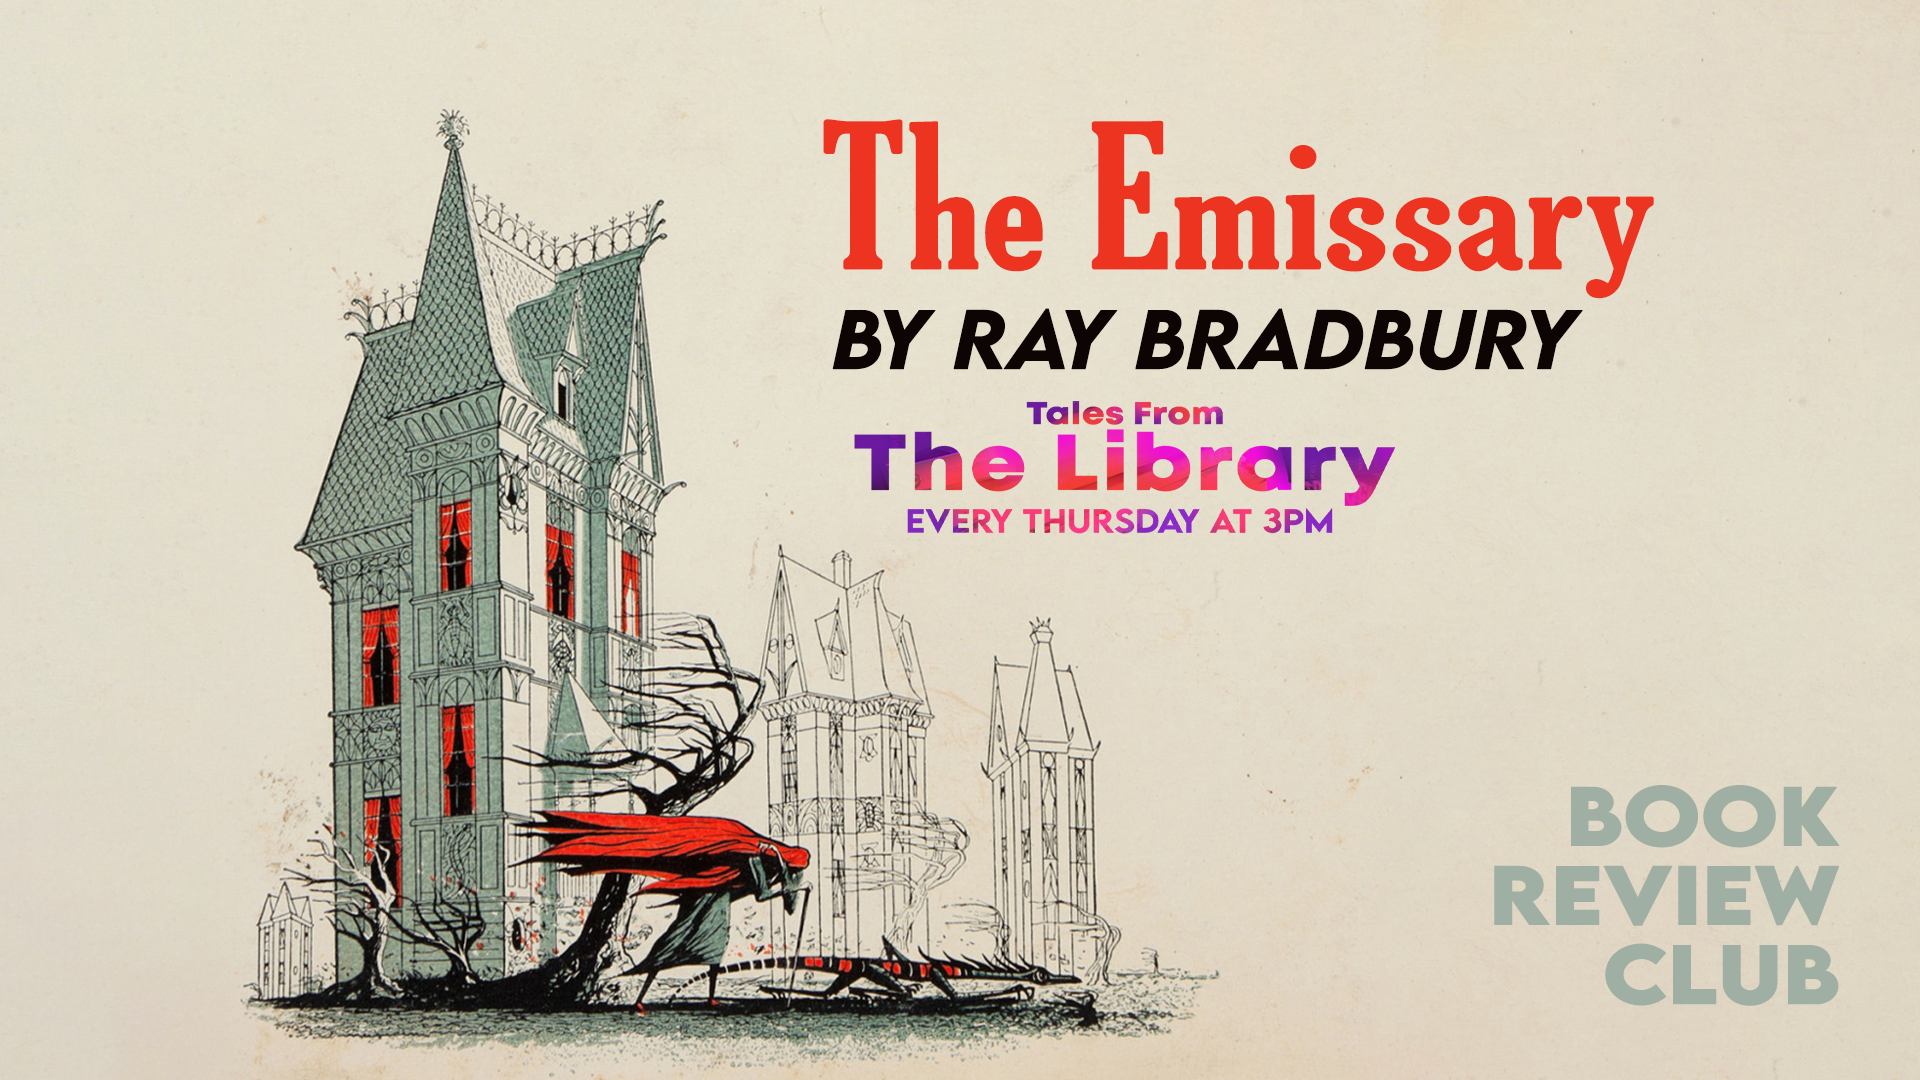 Tales From The Library - The Emissary